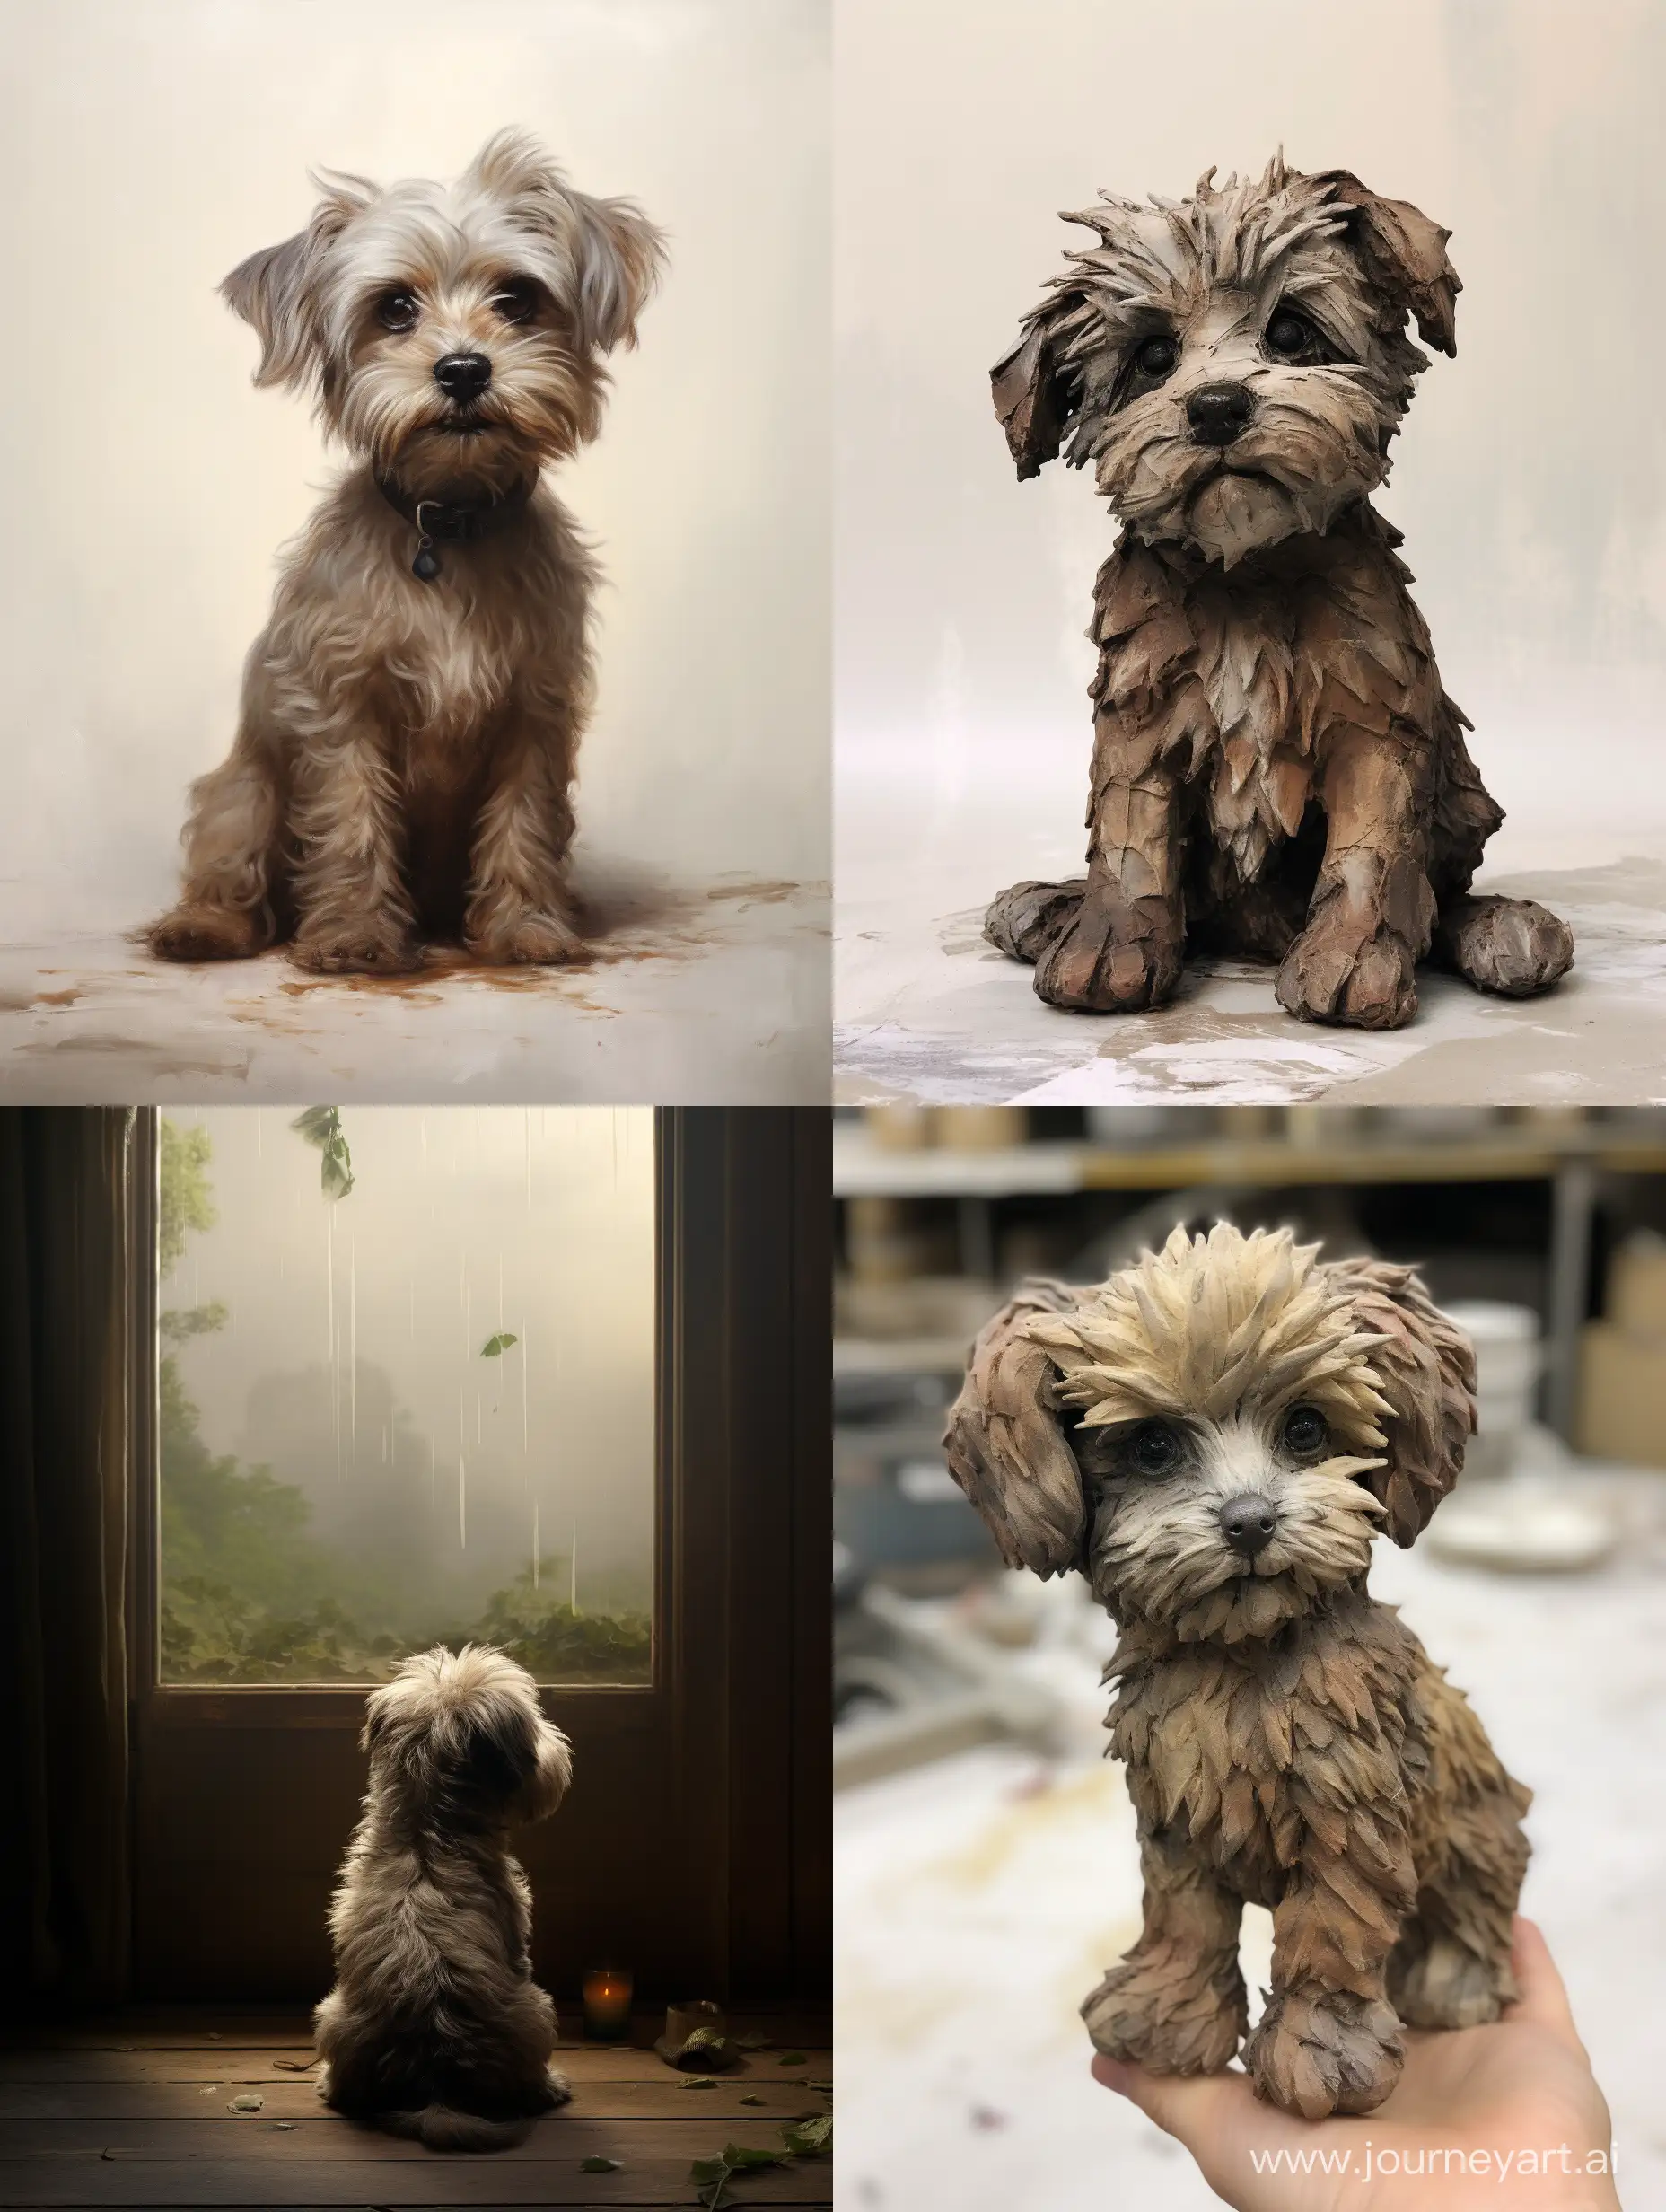 Adorable-Little-Dog-Poses-Artistically-in-a-34-Aspect-Ratio-Image-58222